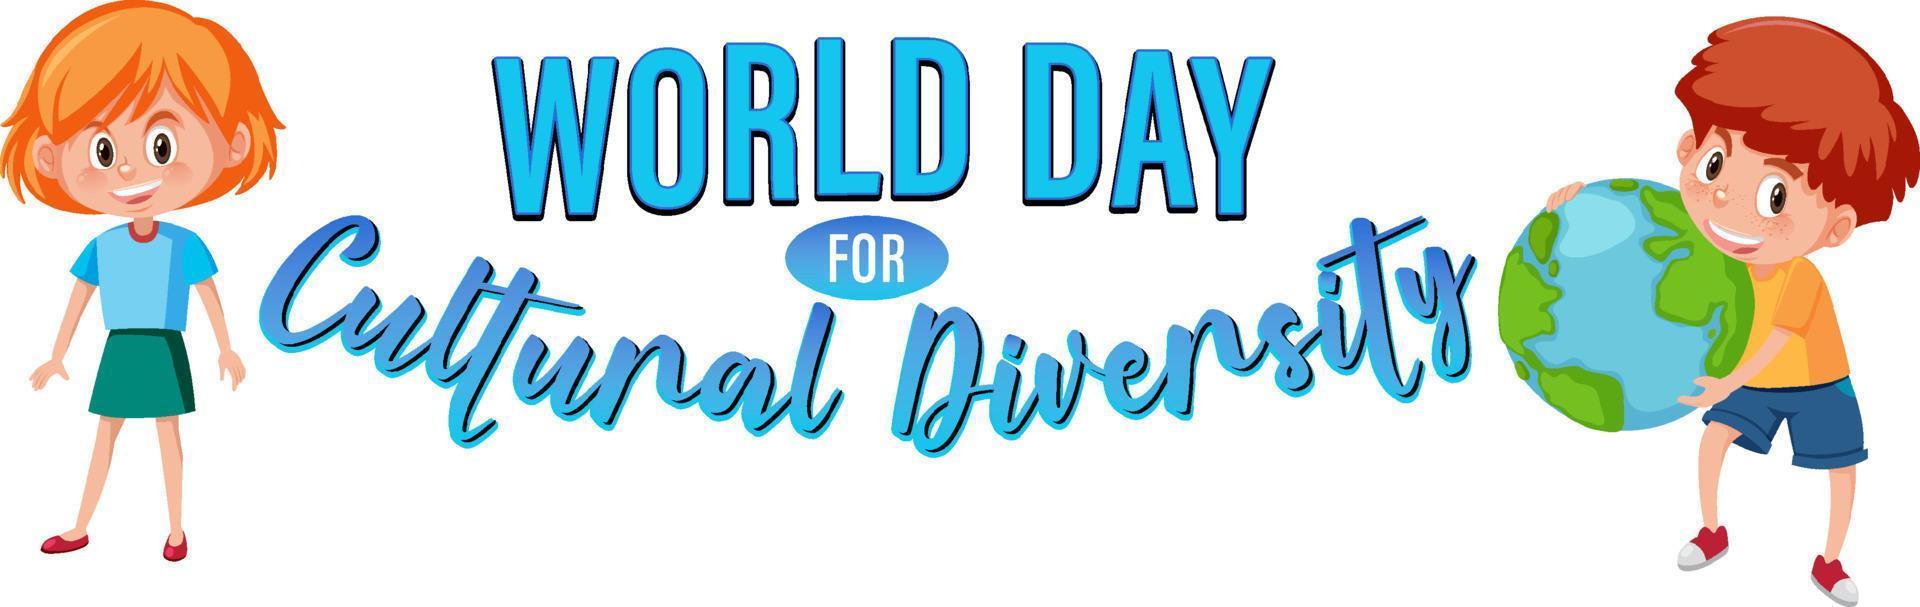 The World Day for Cultural Diversity Logo Design vector